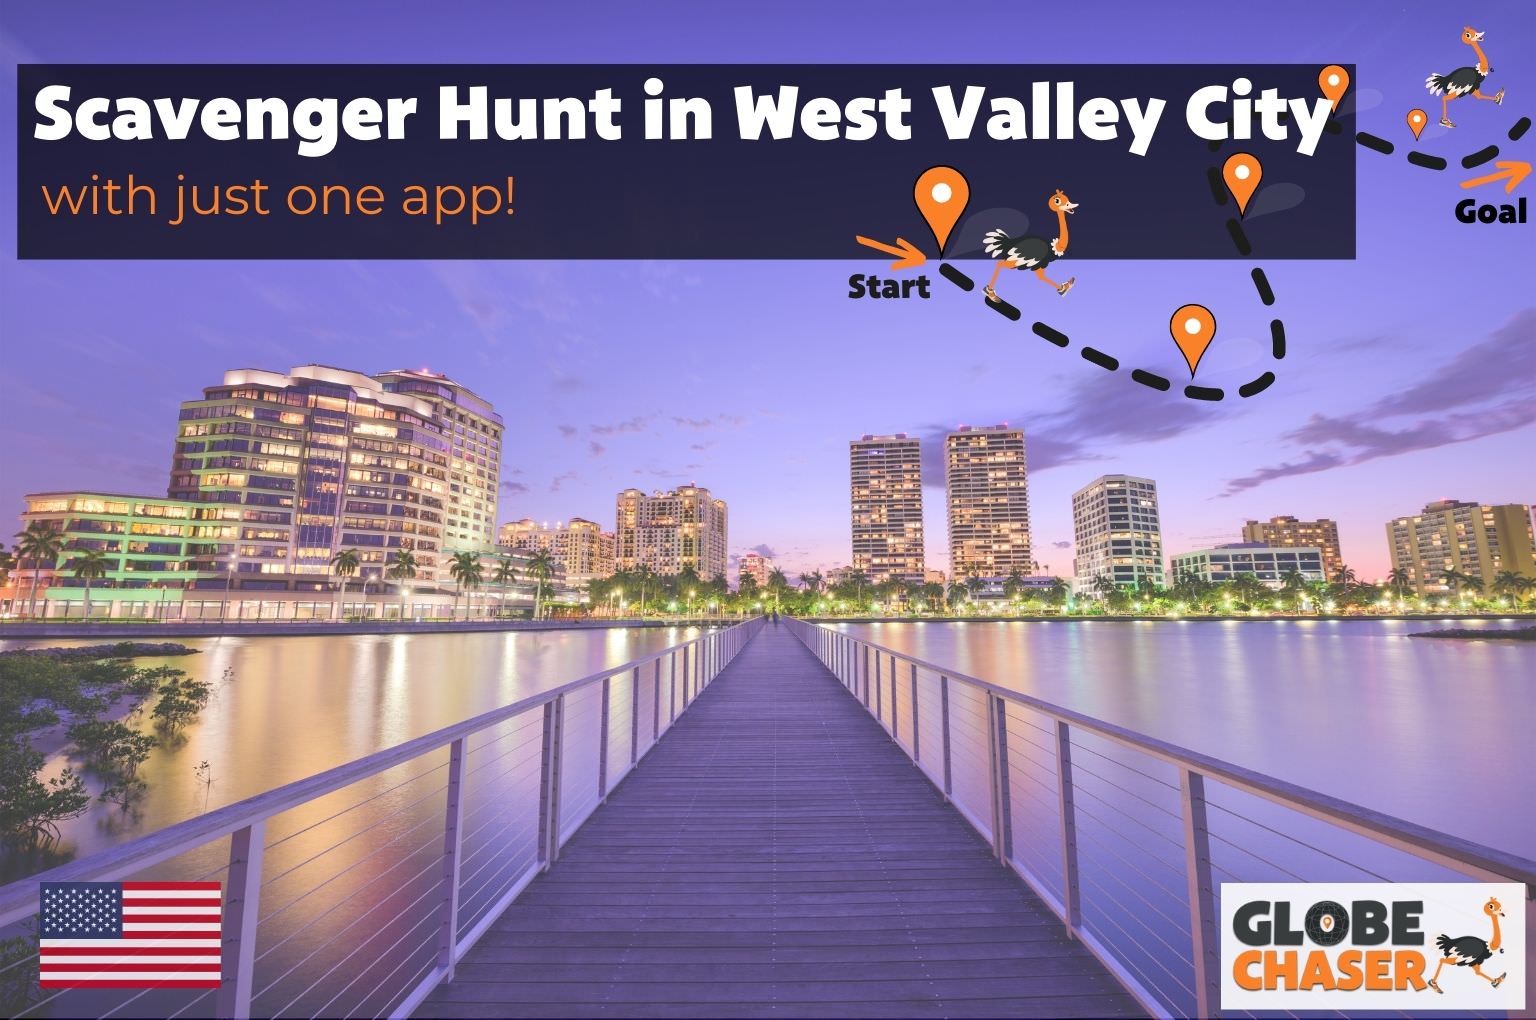 Scavenger Hunt in West Valley City, USA - Family Activities with the Globe Chaser App for Outdoor Fun